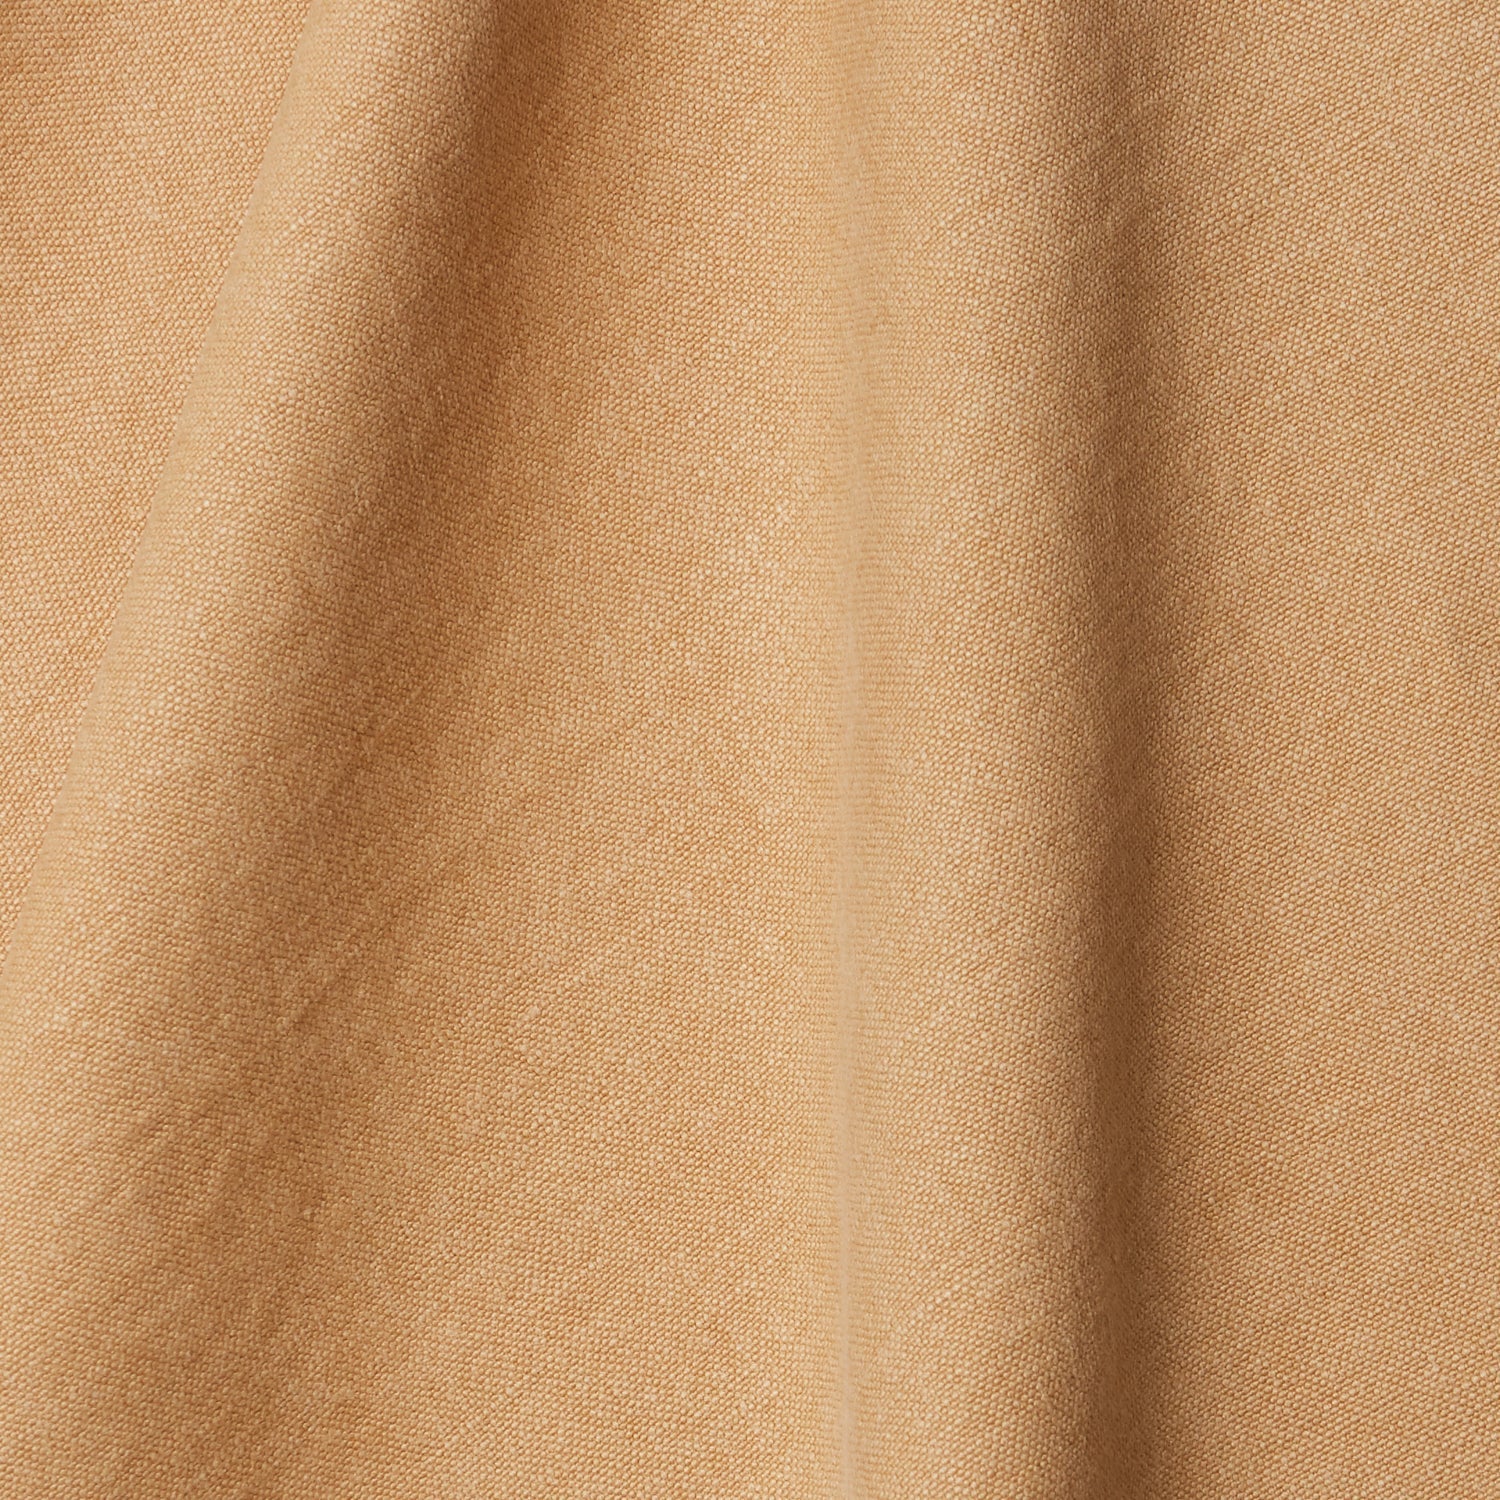 A draped swatch of linen fabric in a solid tan color.